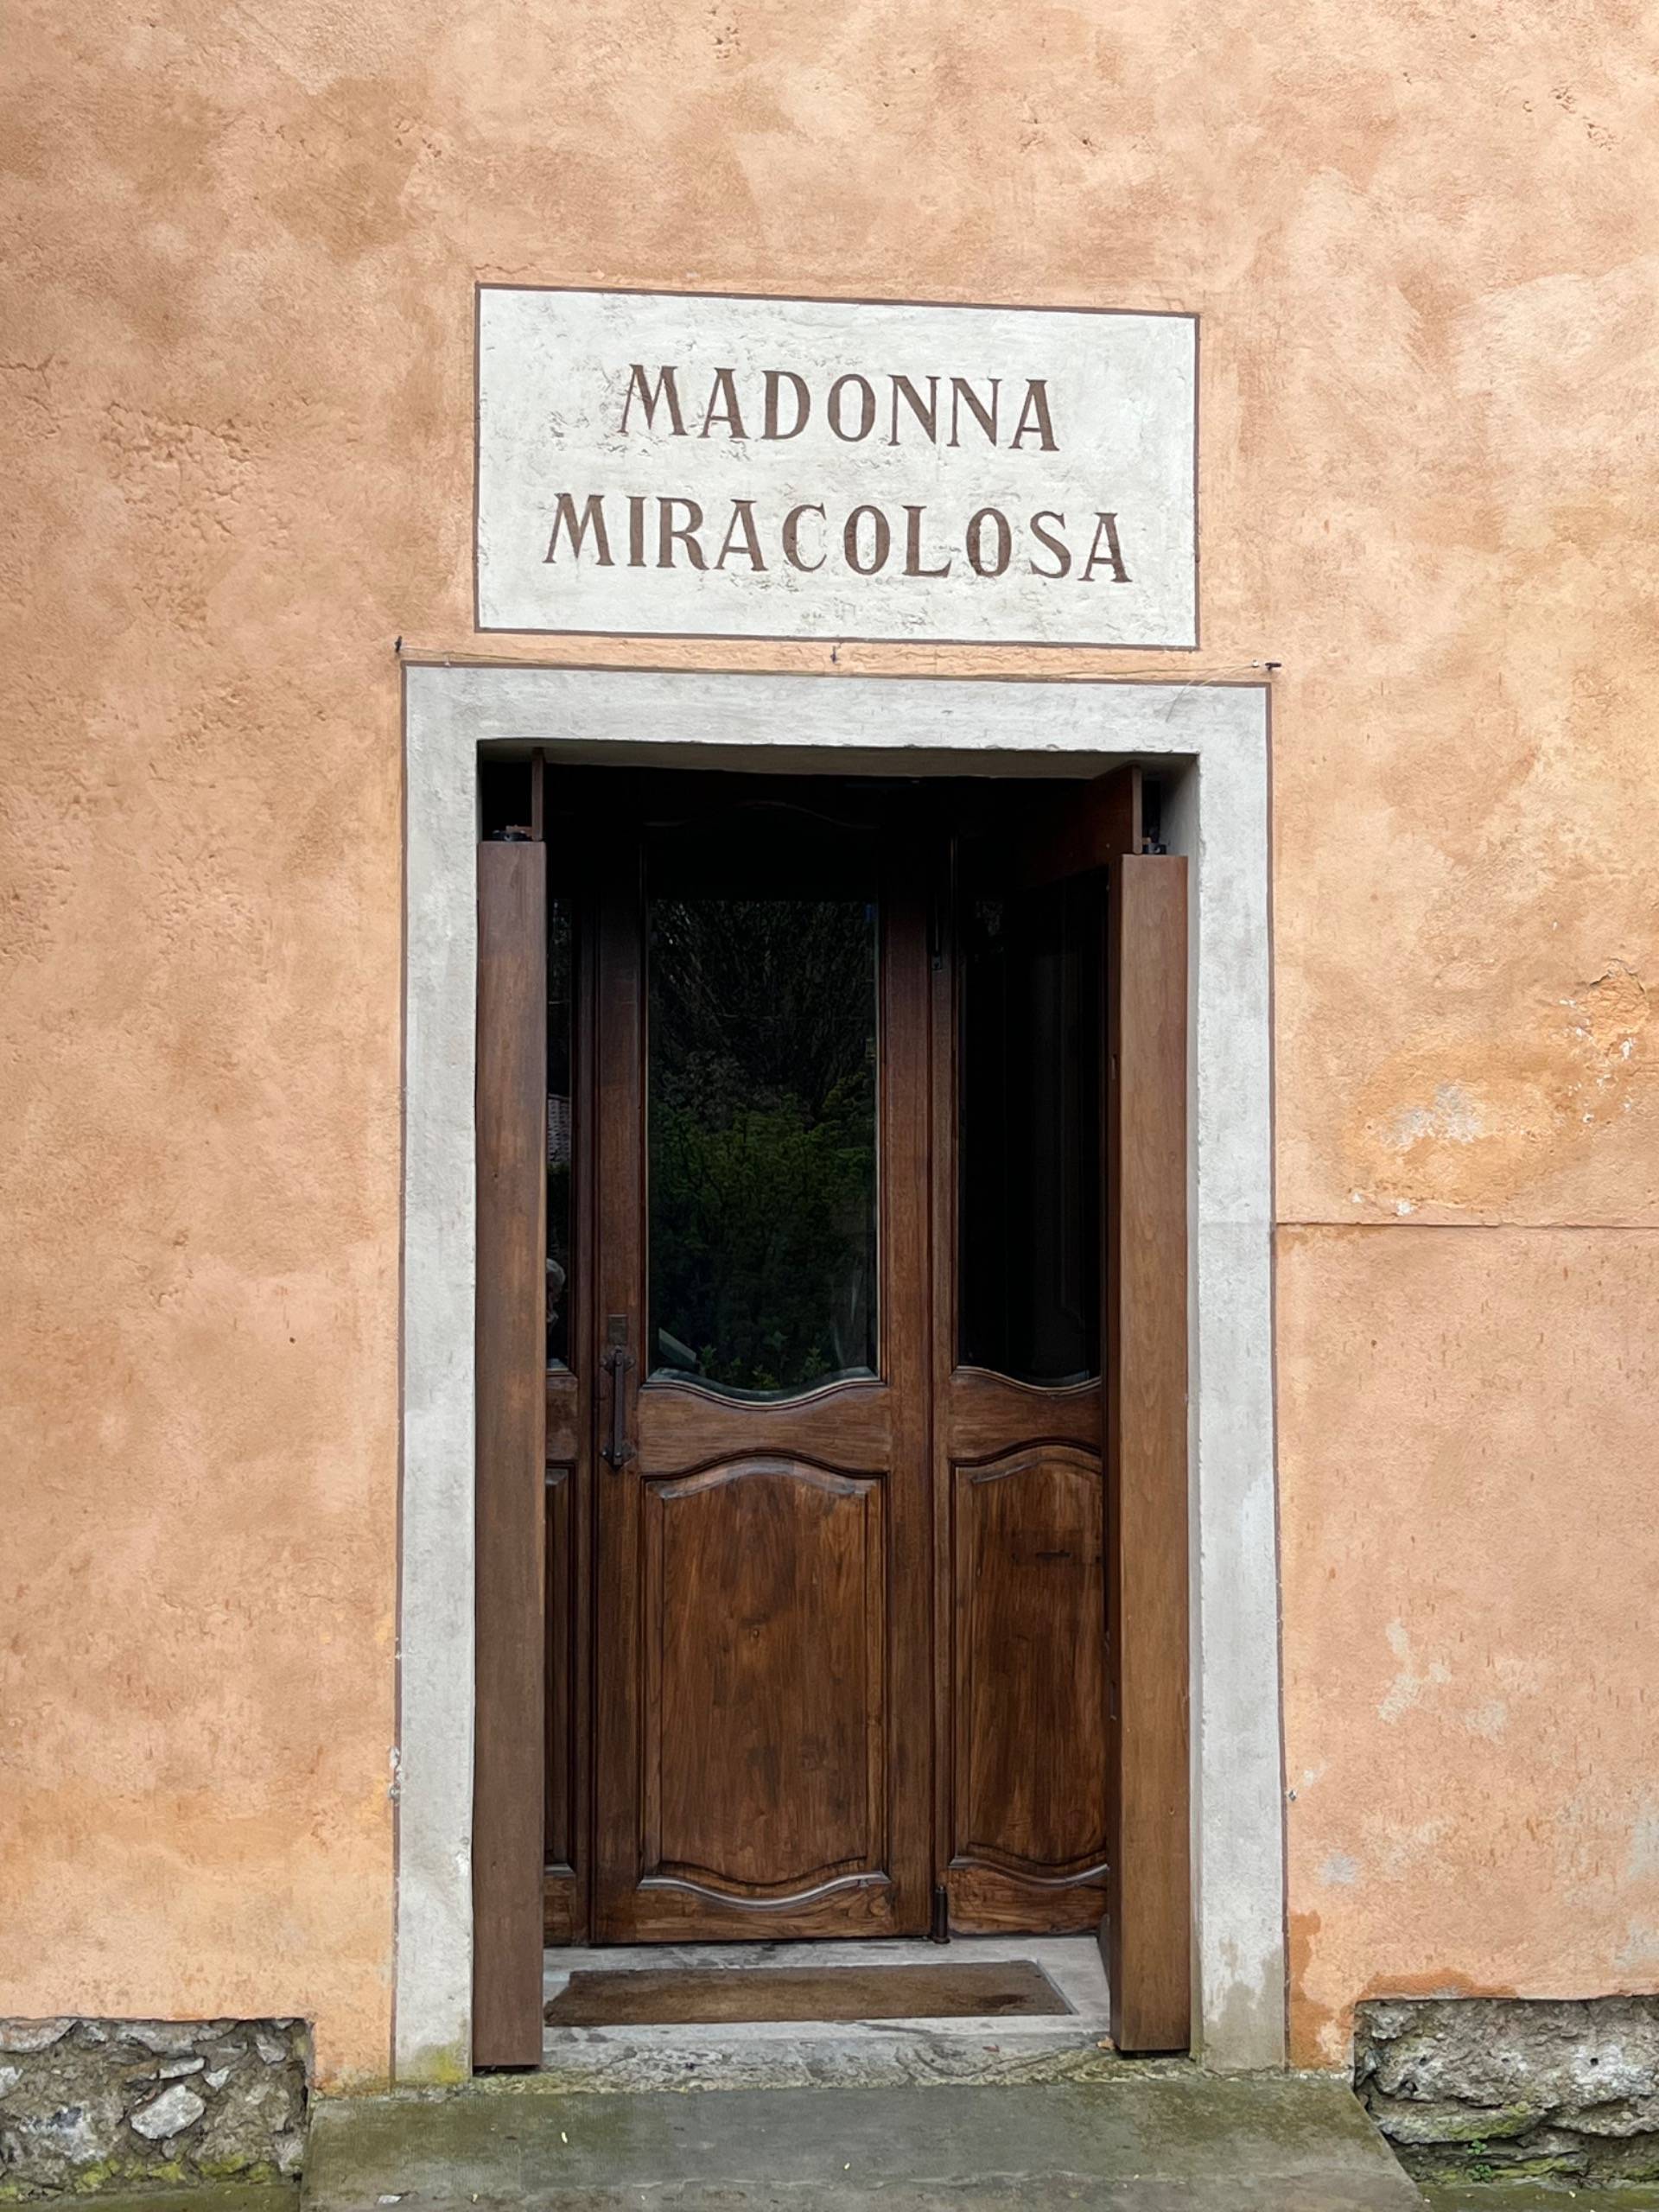 A Hike with Heavenly Views: Unveiling the Madonna Miracolosa near Brusimpiano